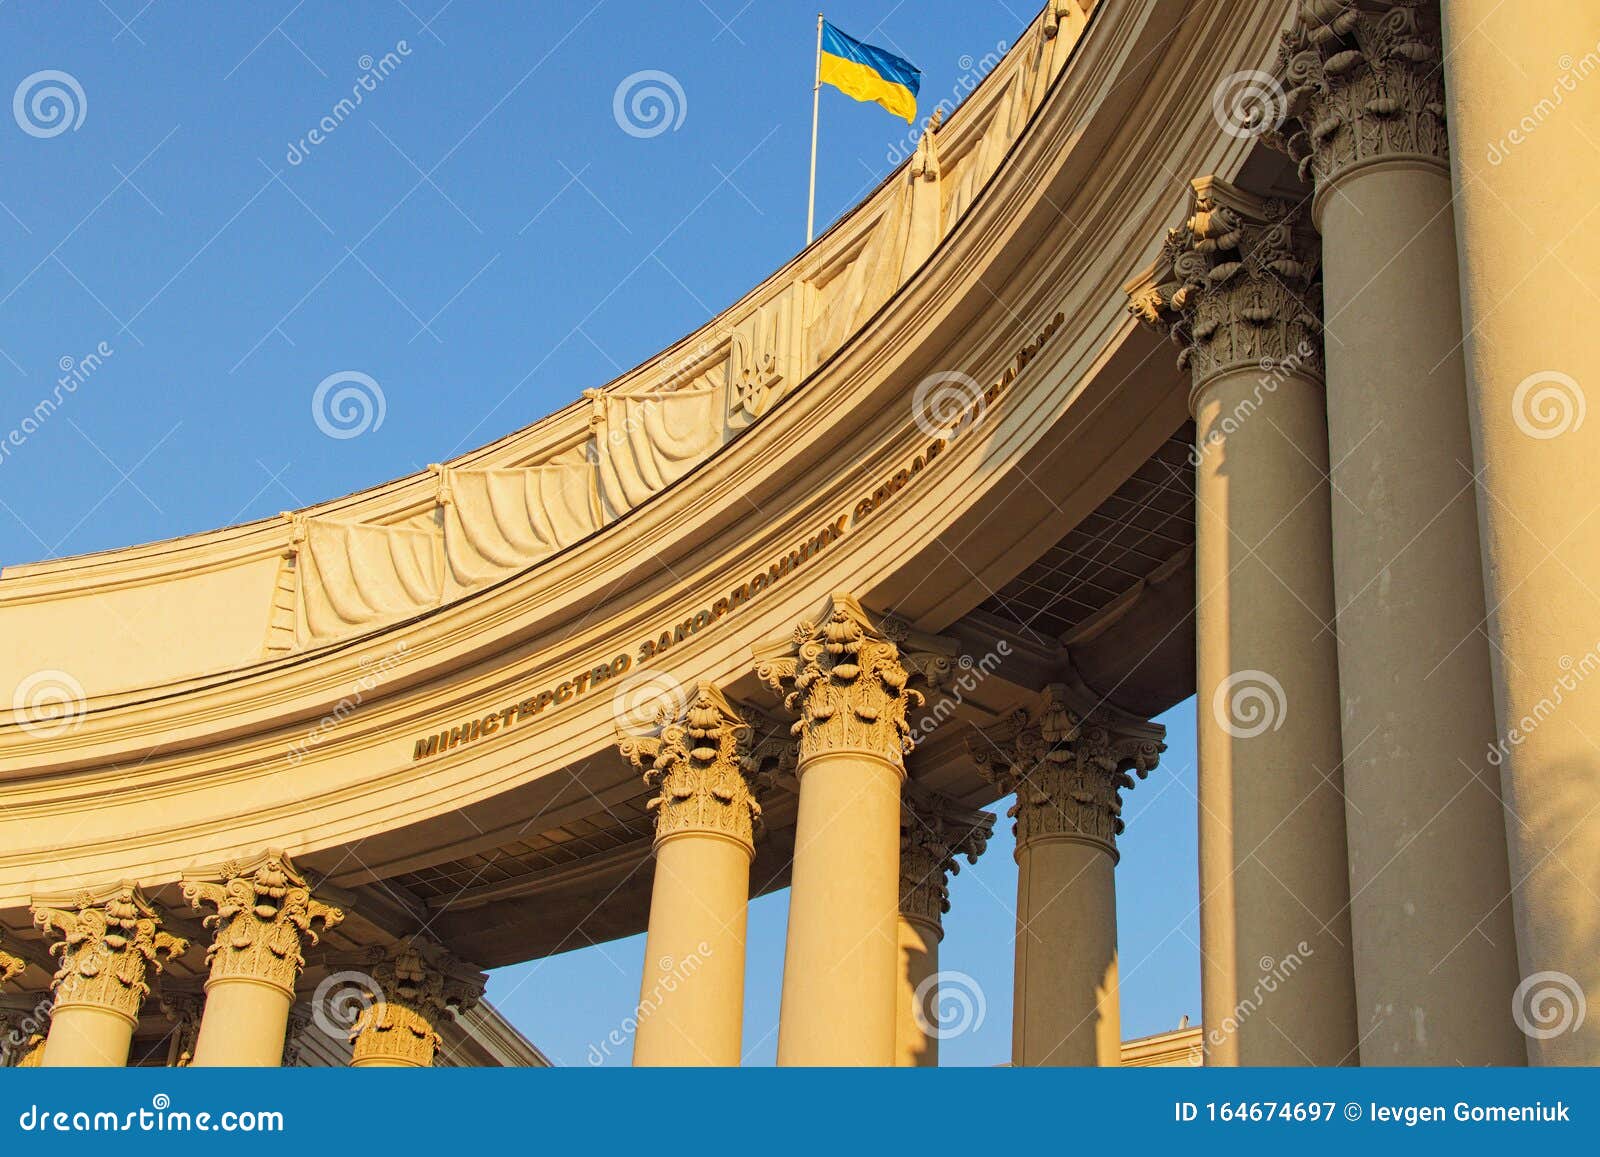 part of the building with columns of ministry of foreign affairs of ukraine.